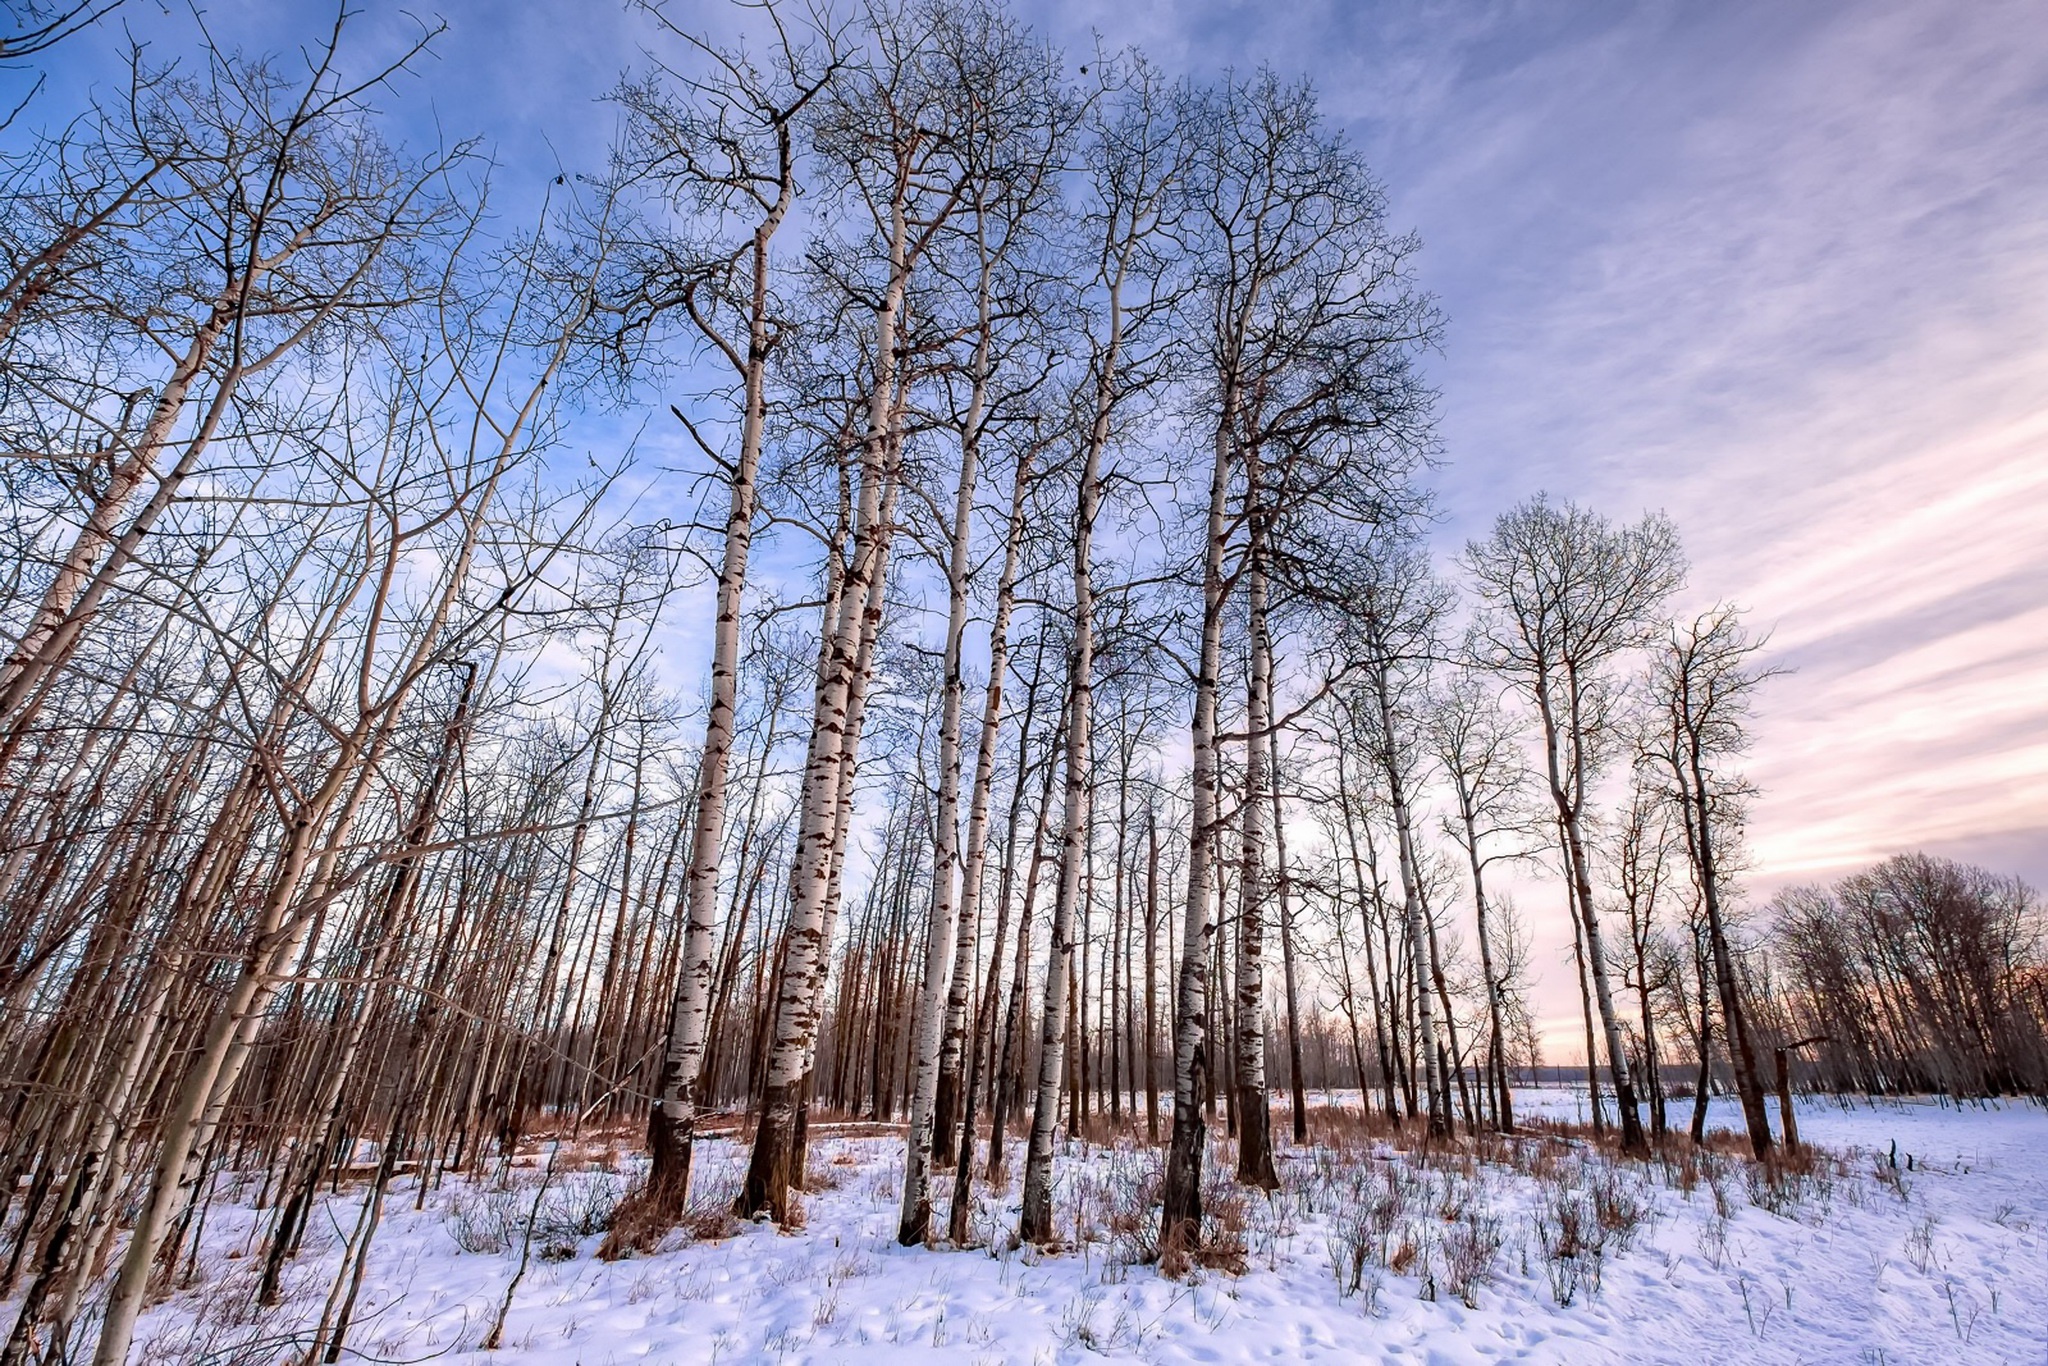 General 2048x1366 nature winter trees snow